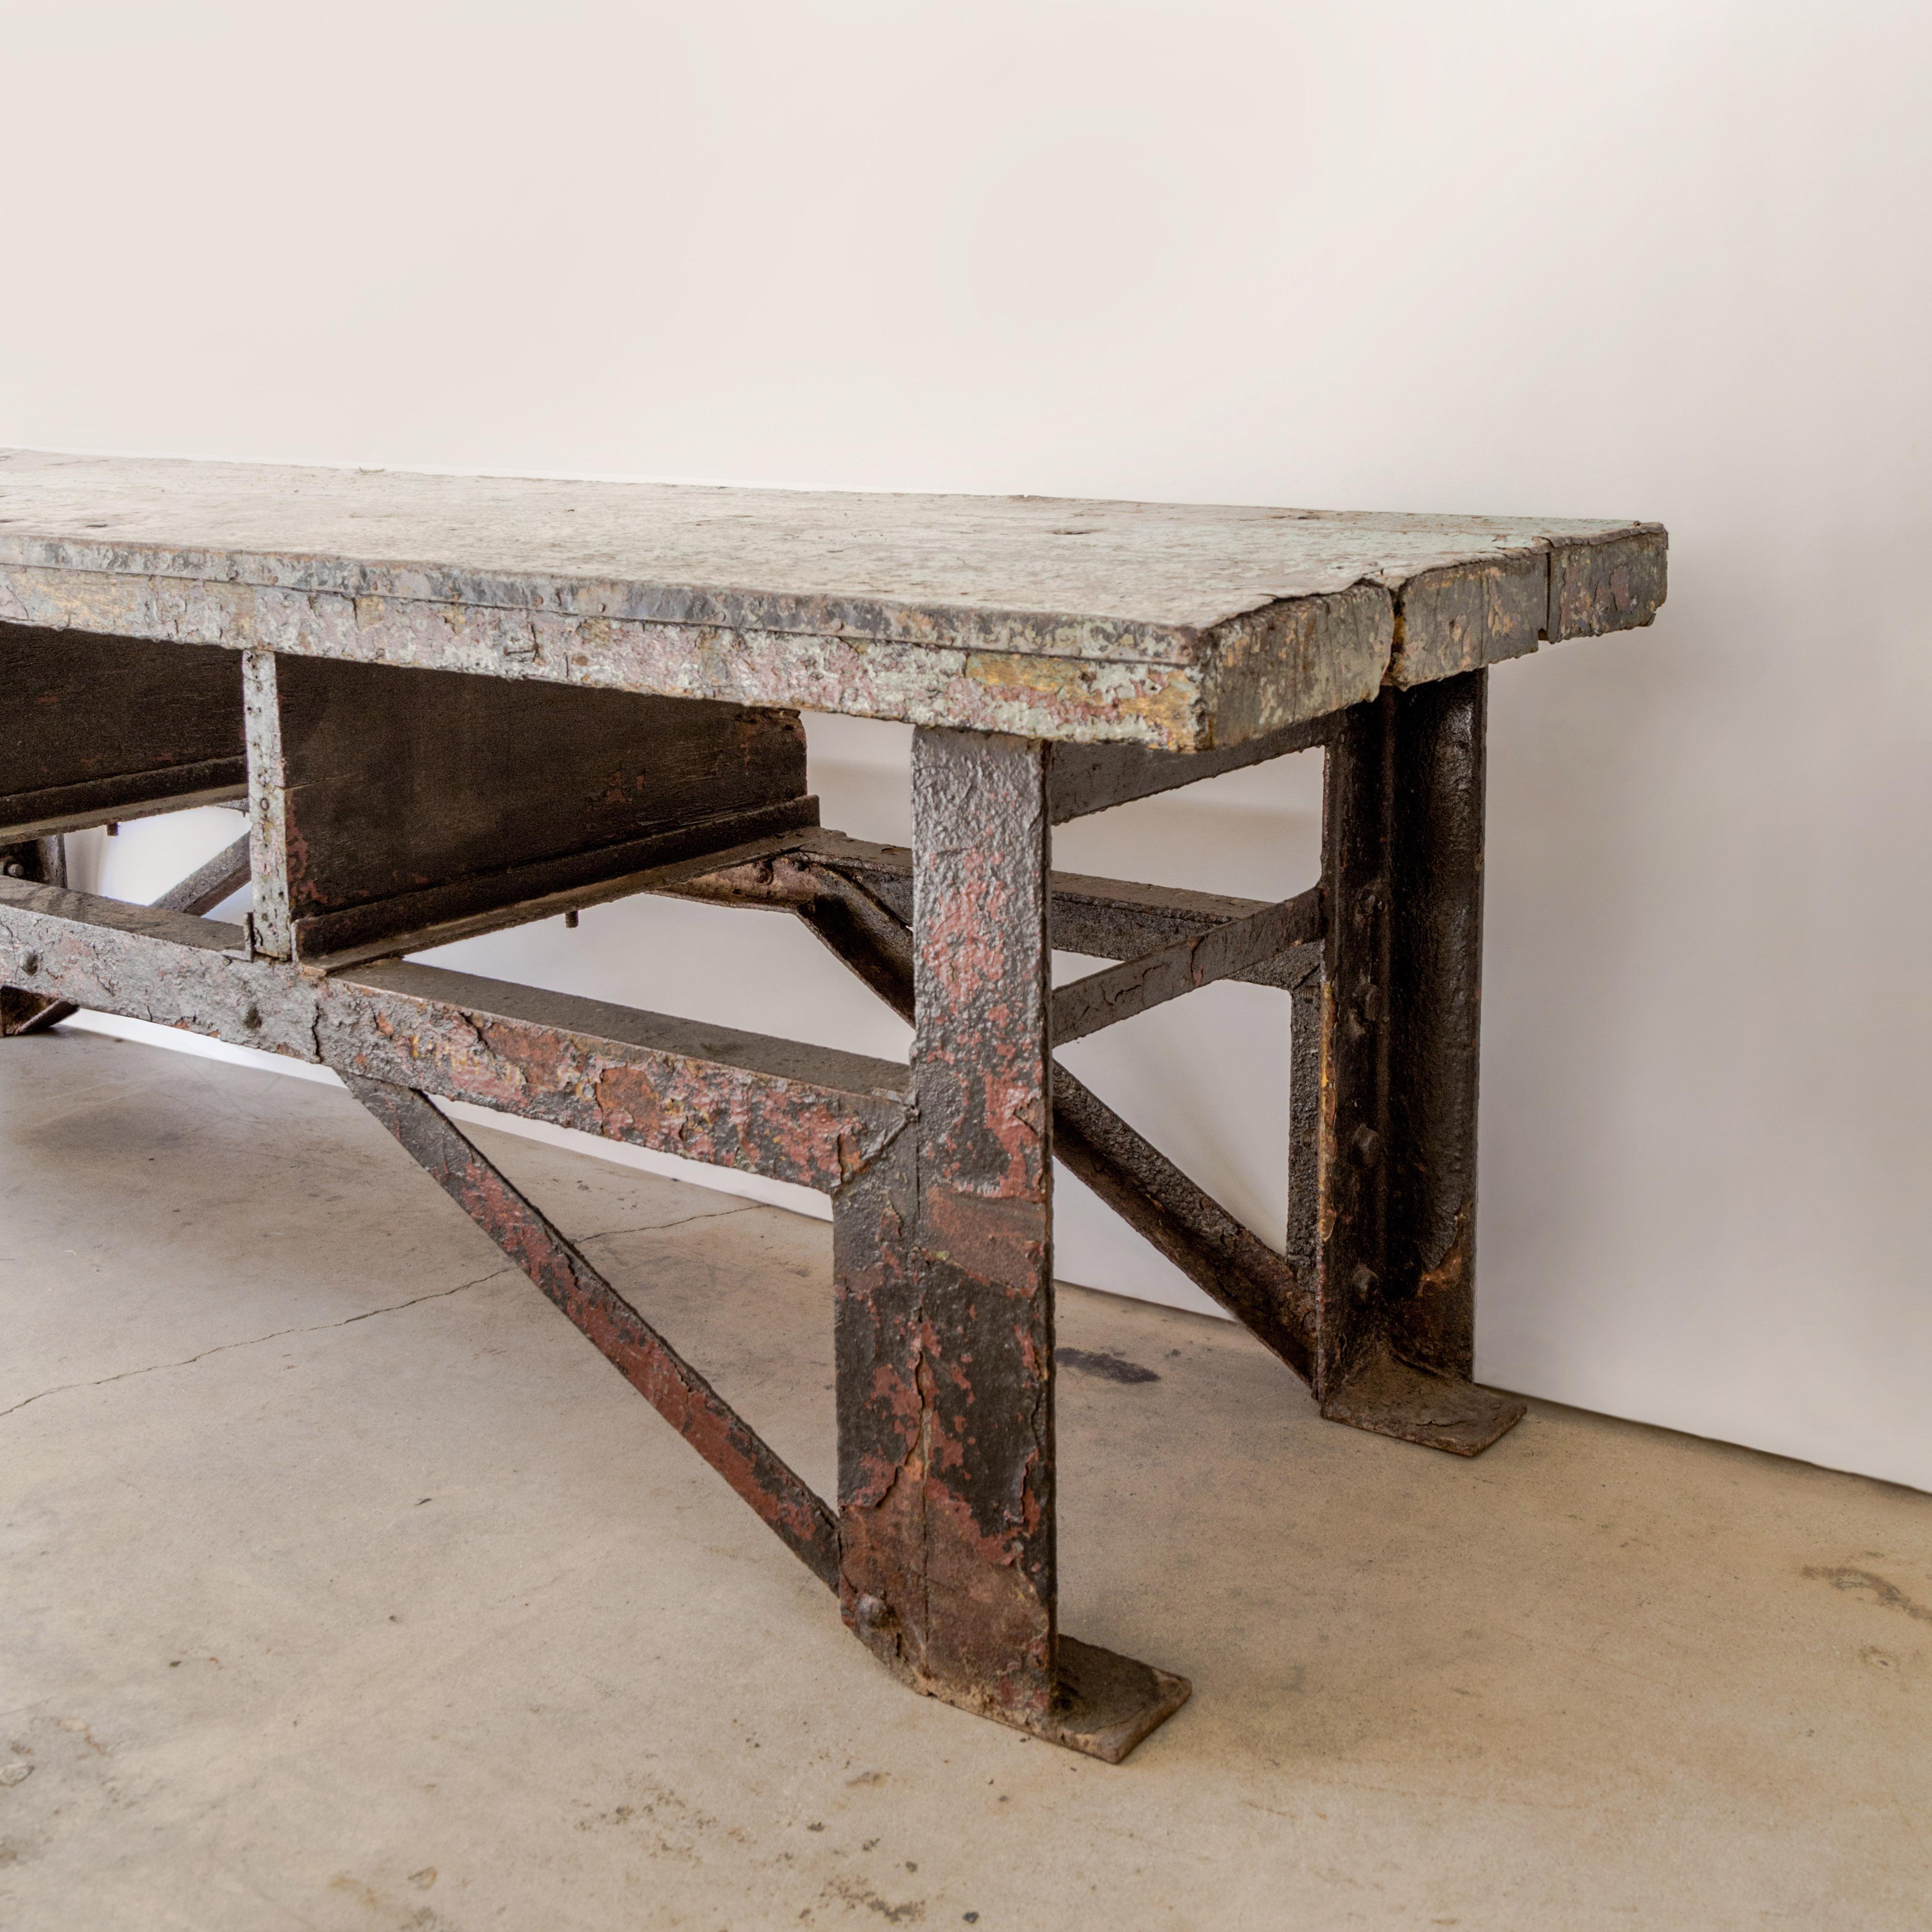 Super Metal Clad Wood + Steel Industrial Table   In Good Condition For Sale In West Hollywood, CA